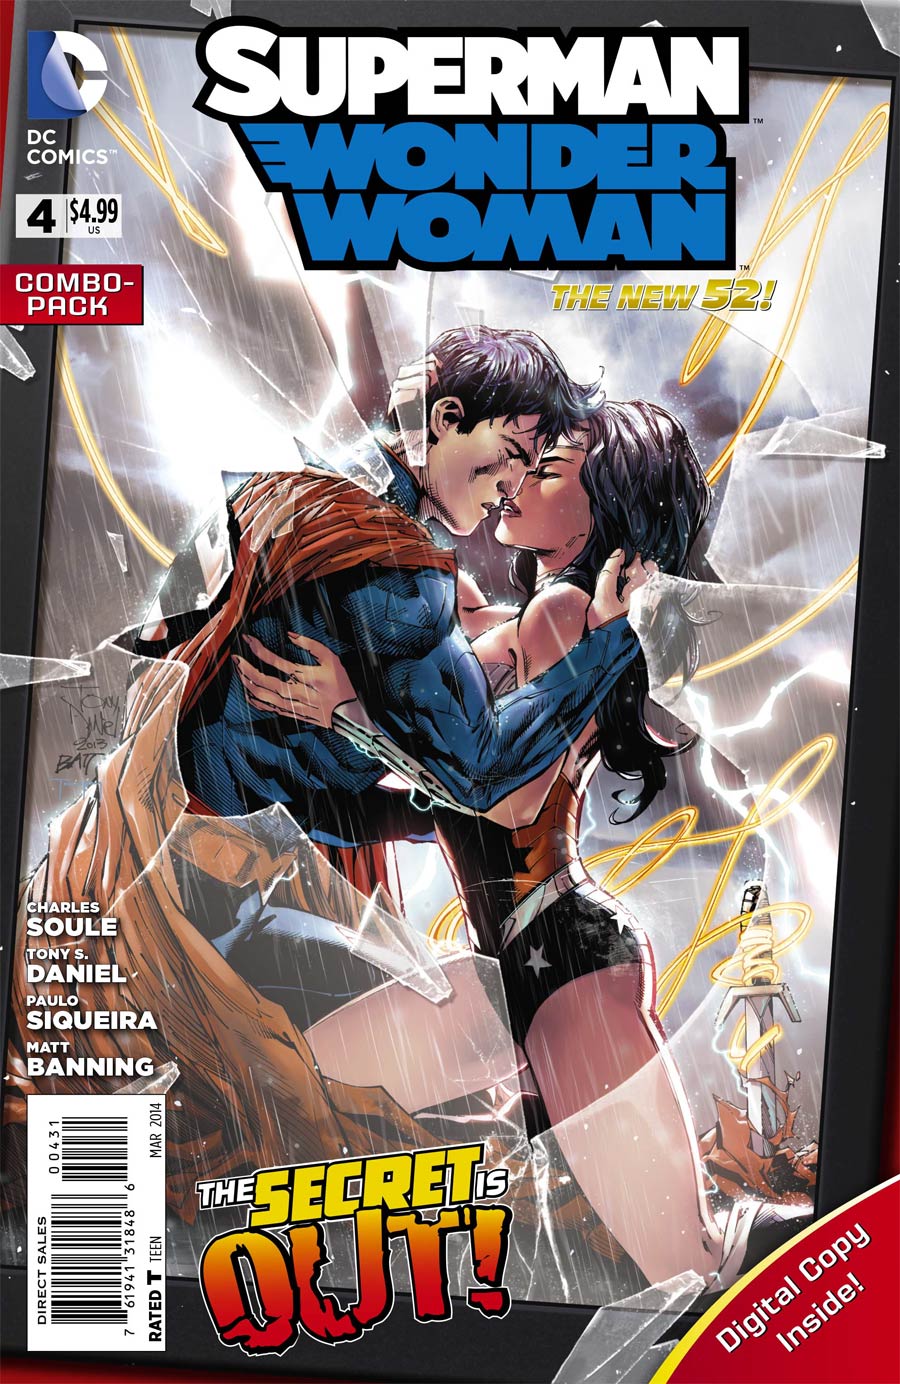 Superman Wonder Woman #4 Cover C Combo Pack Without Polybag